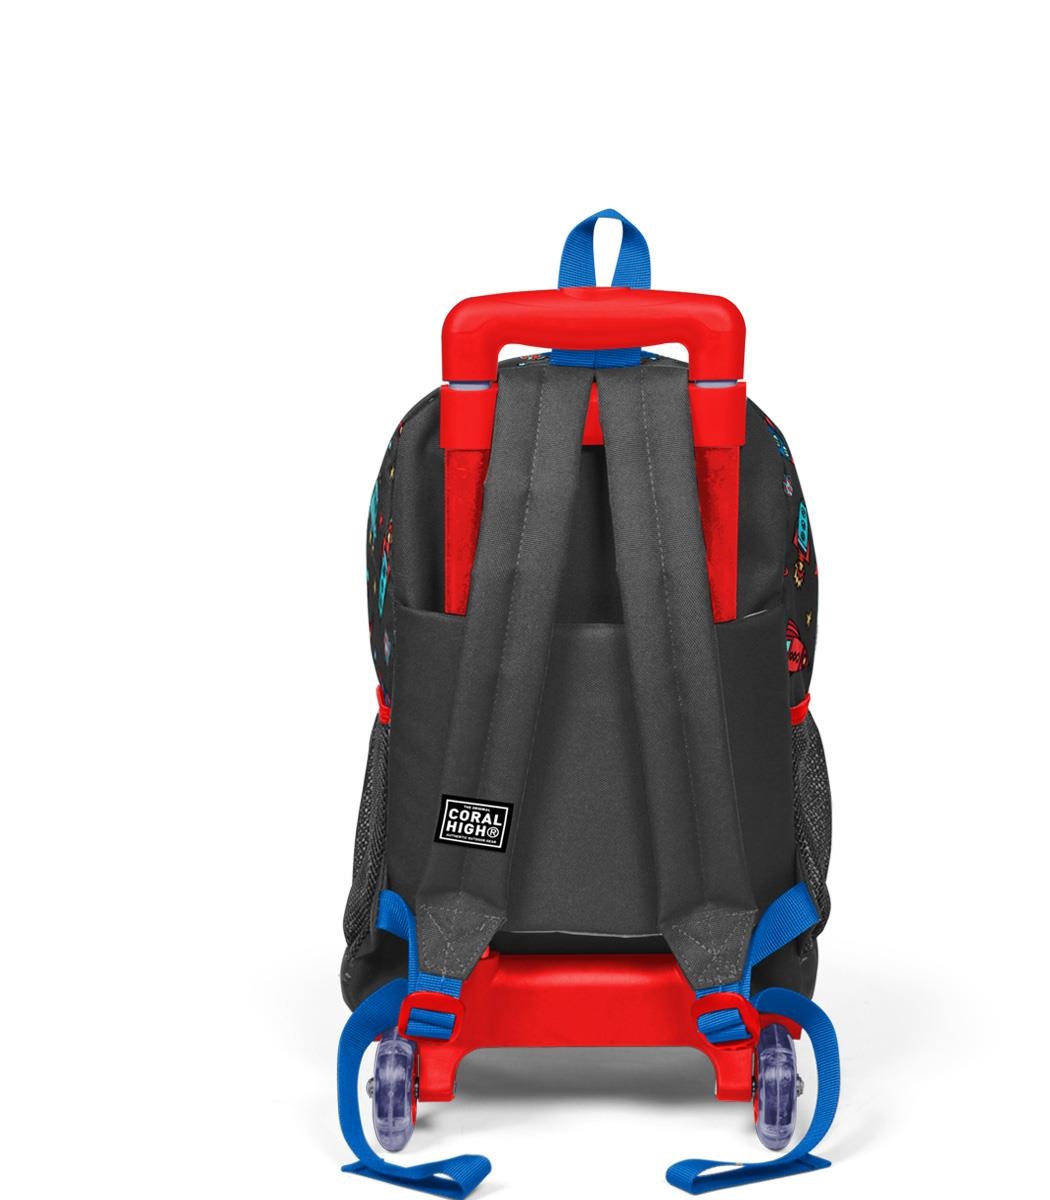 Coral High Kids Three Compartment Squeegee School Backpack - Dark Gray Red Space Pattern